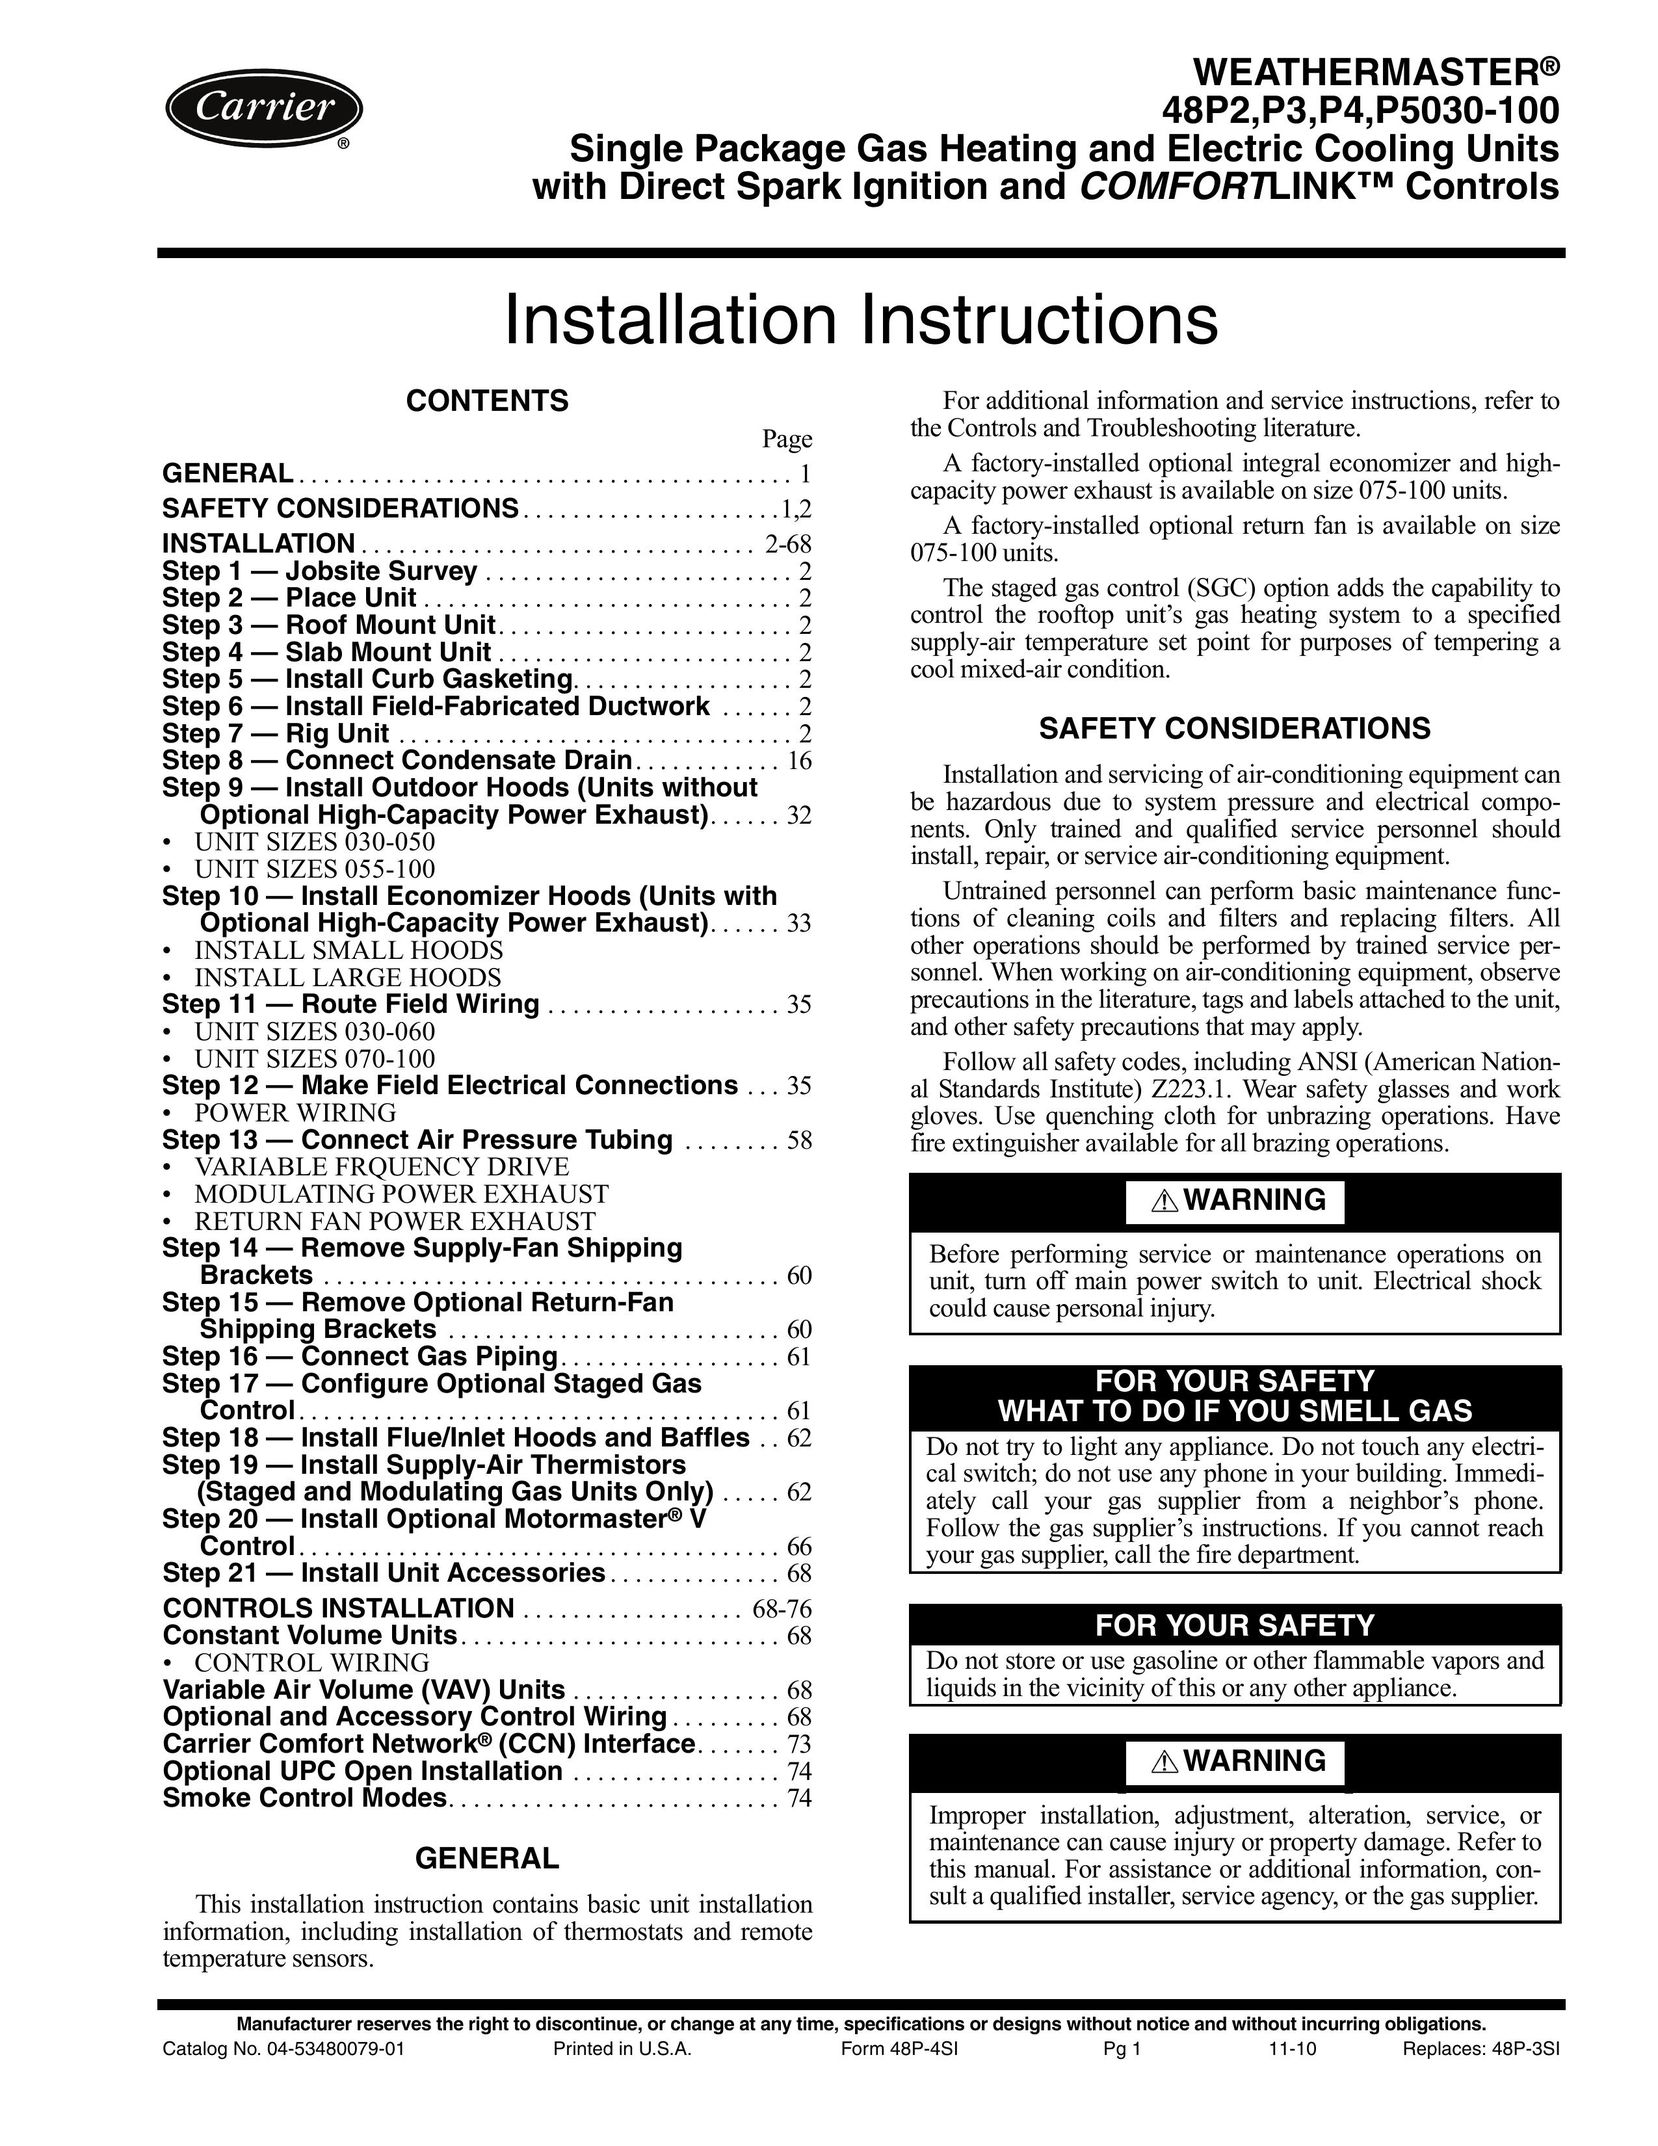 Carrier P5030-100 Electric Heater User Manual